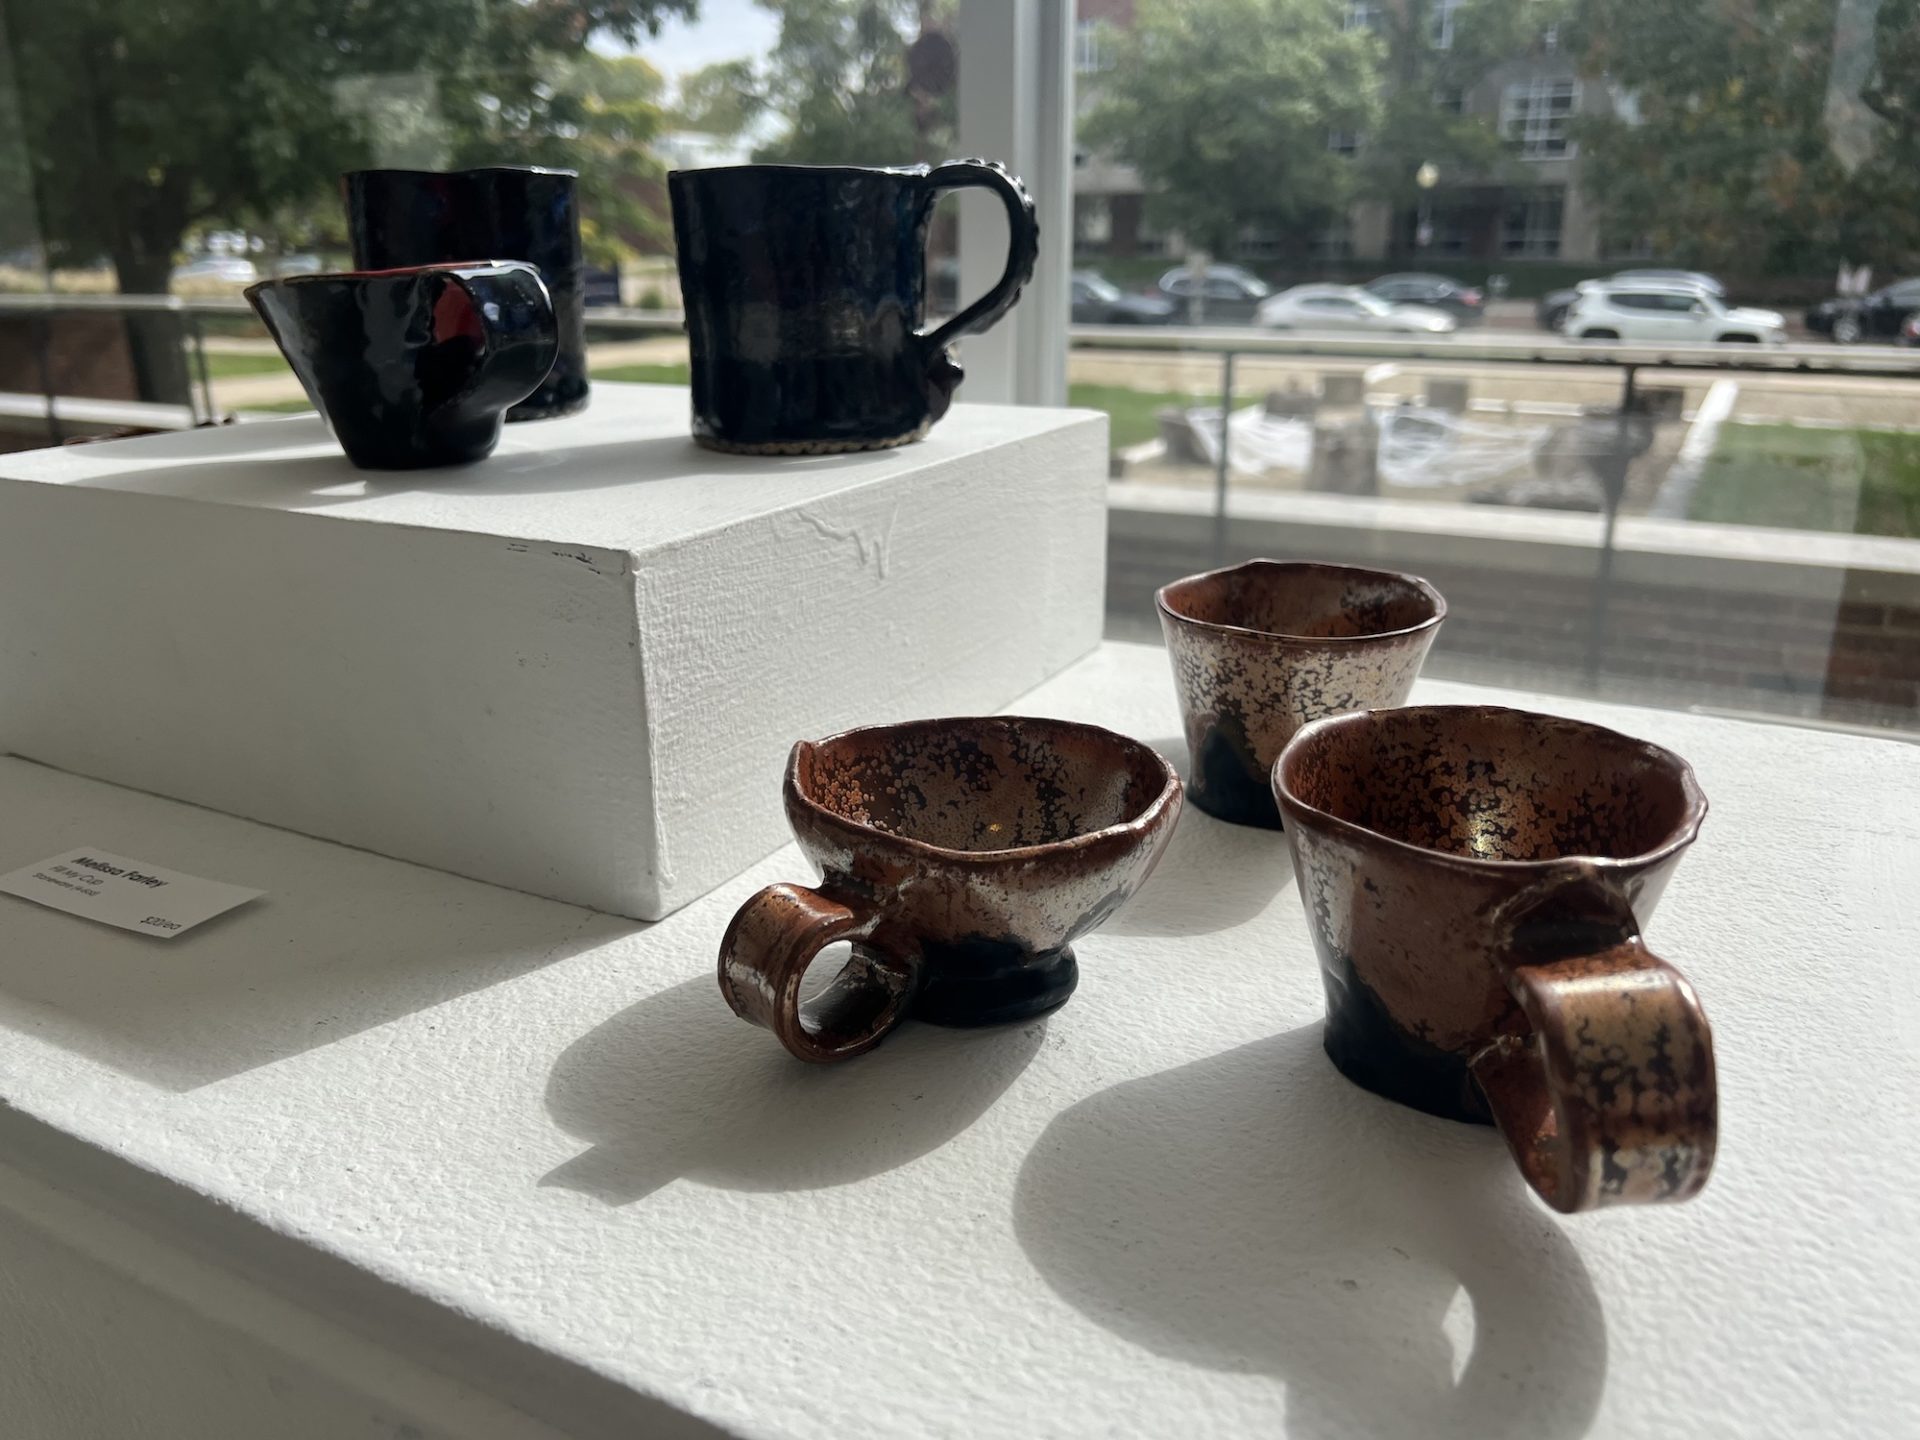 cups sit on a white display in front of a large window